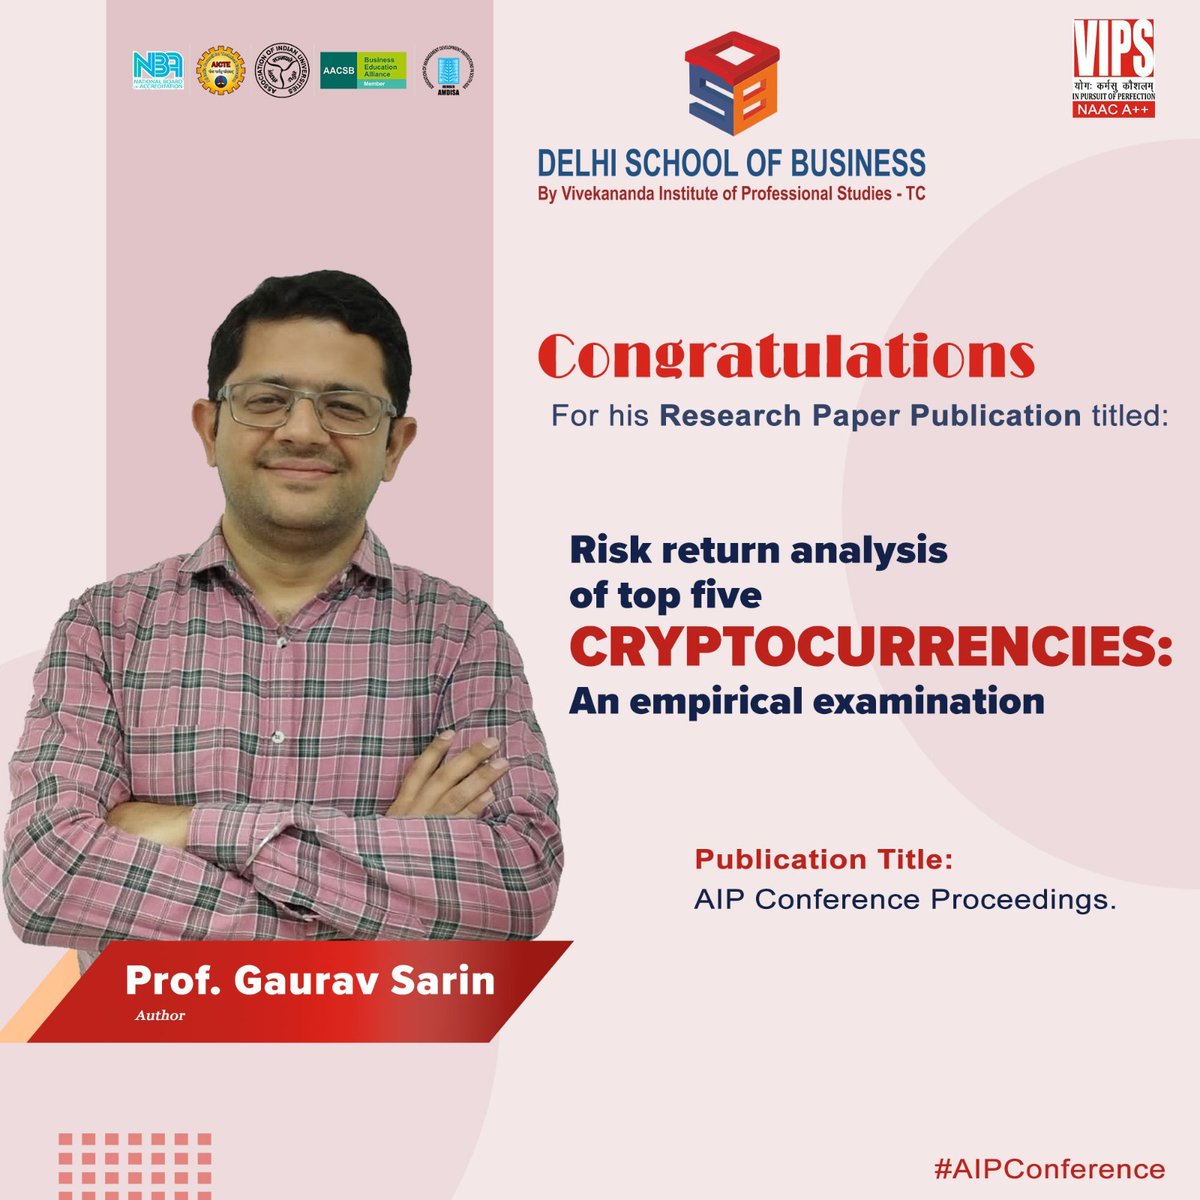 DSB commends Prof. Gaurav Sarin for his successful research paper publication titled 'Risk Return Analysis of Top Five Cryptocurrencies: An Empirical Examination' in the Journal titled AIP Conference Proceedings. #DSBResearch #Blockchain #DelhiSchoolOfBusiness #DSBVIPS #PGDM #DSB